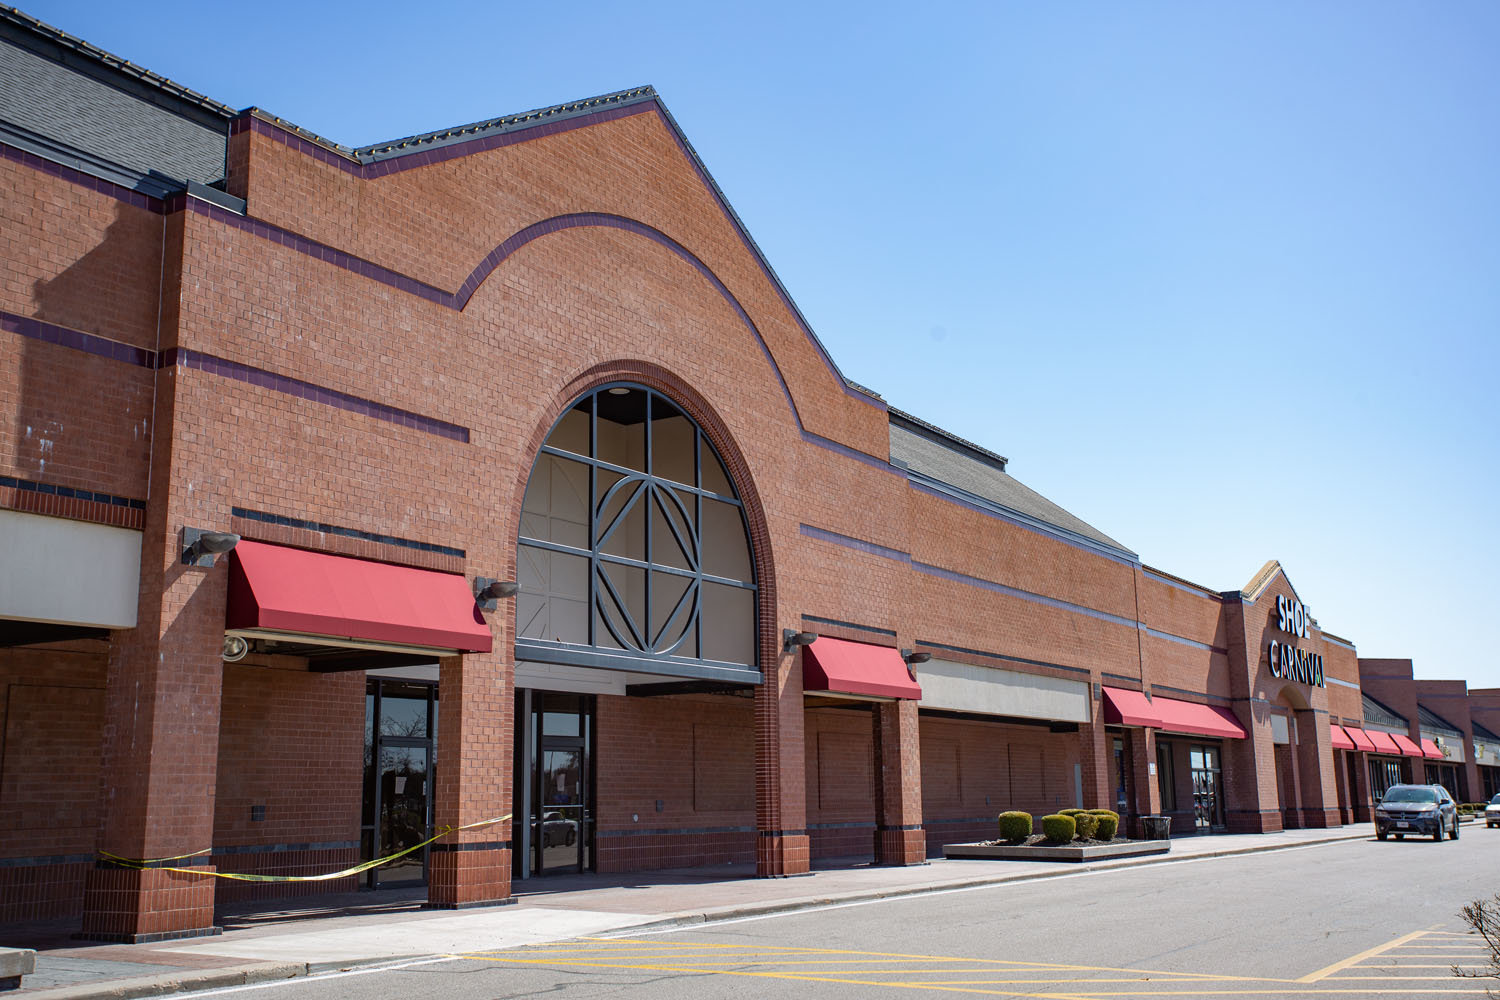 MOVING IN: Burlington is taking over the former JCPenney Home Store at 3402 S. Glenstone Ave.